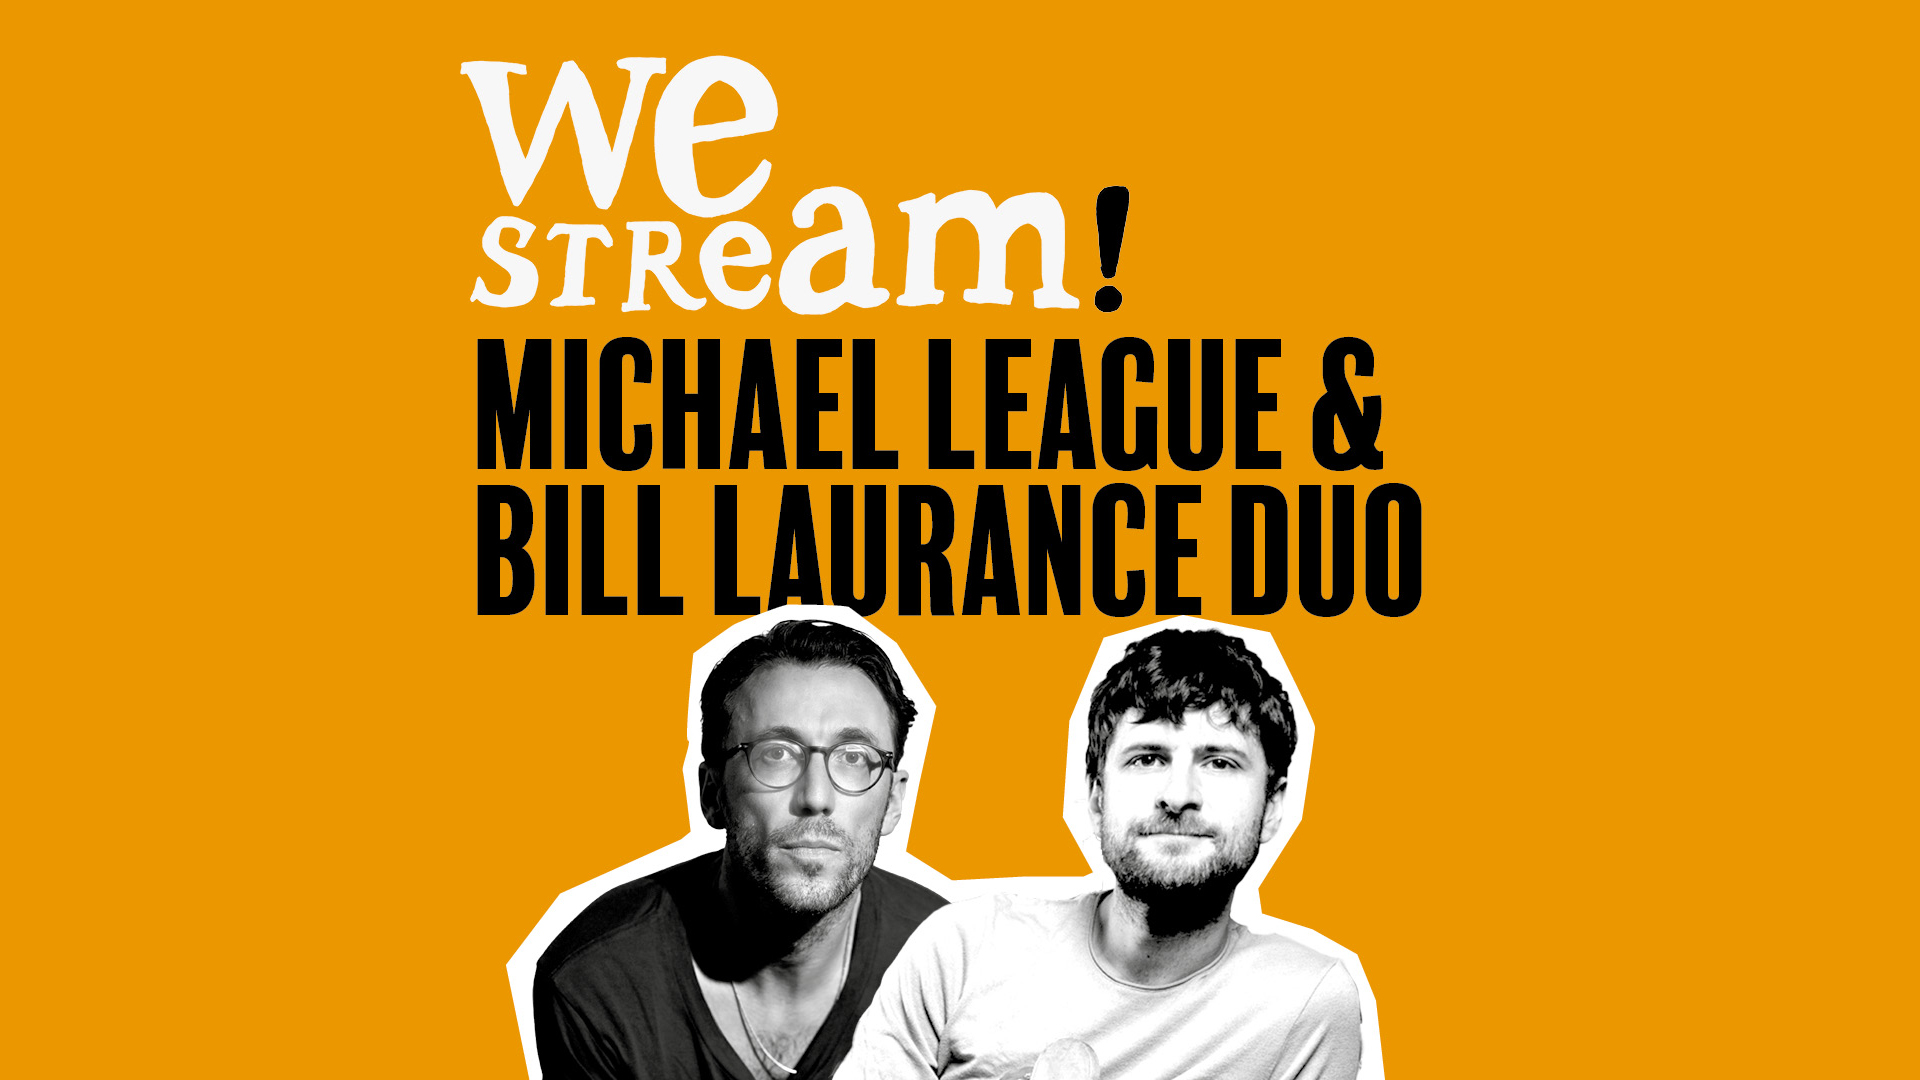 Michael League & Bill Laurance Duo feat. Y. Canizares, N. Fischer, R. Suhner & A. Huber